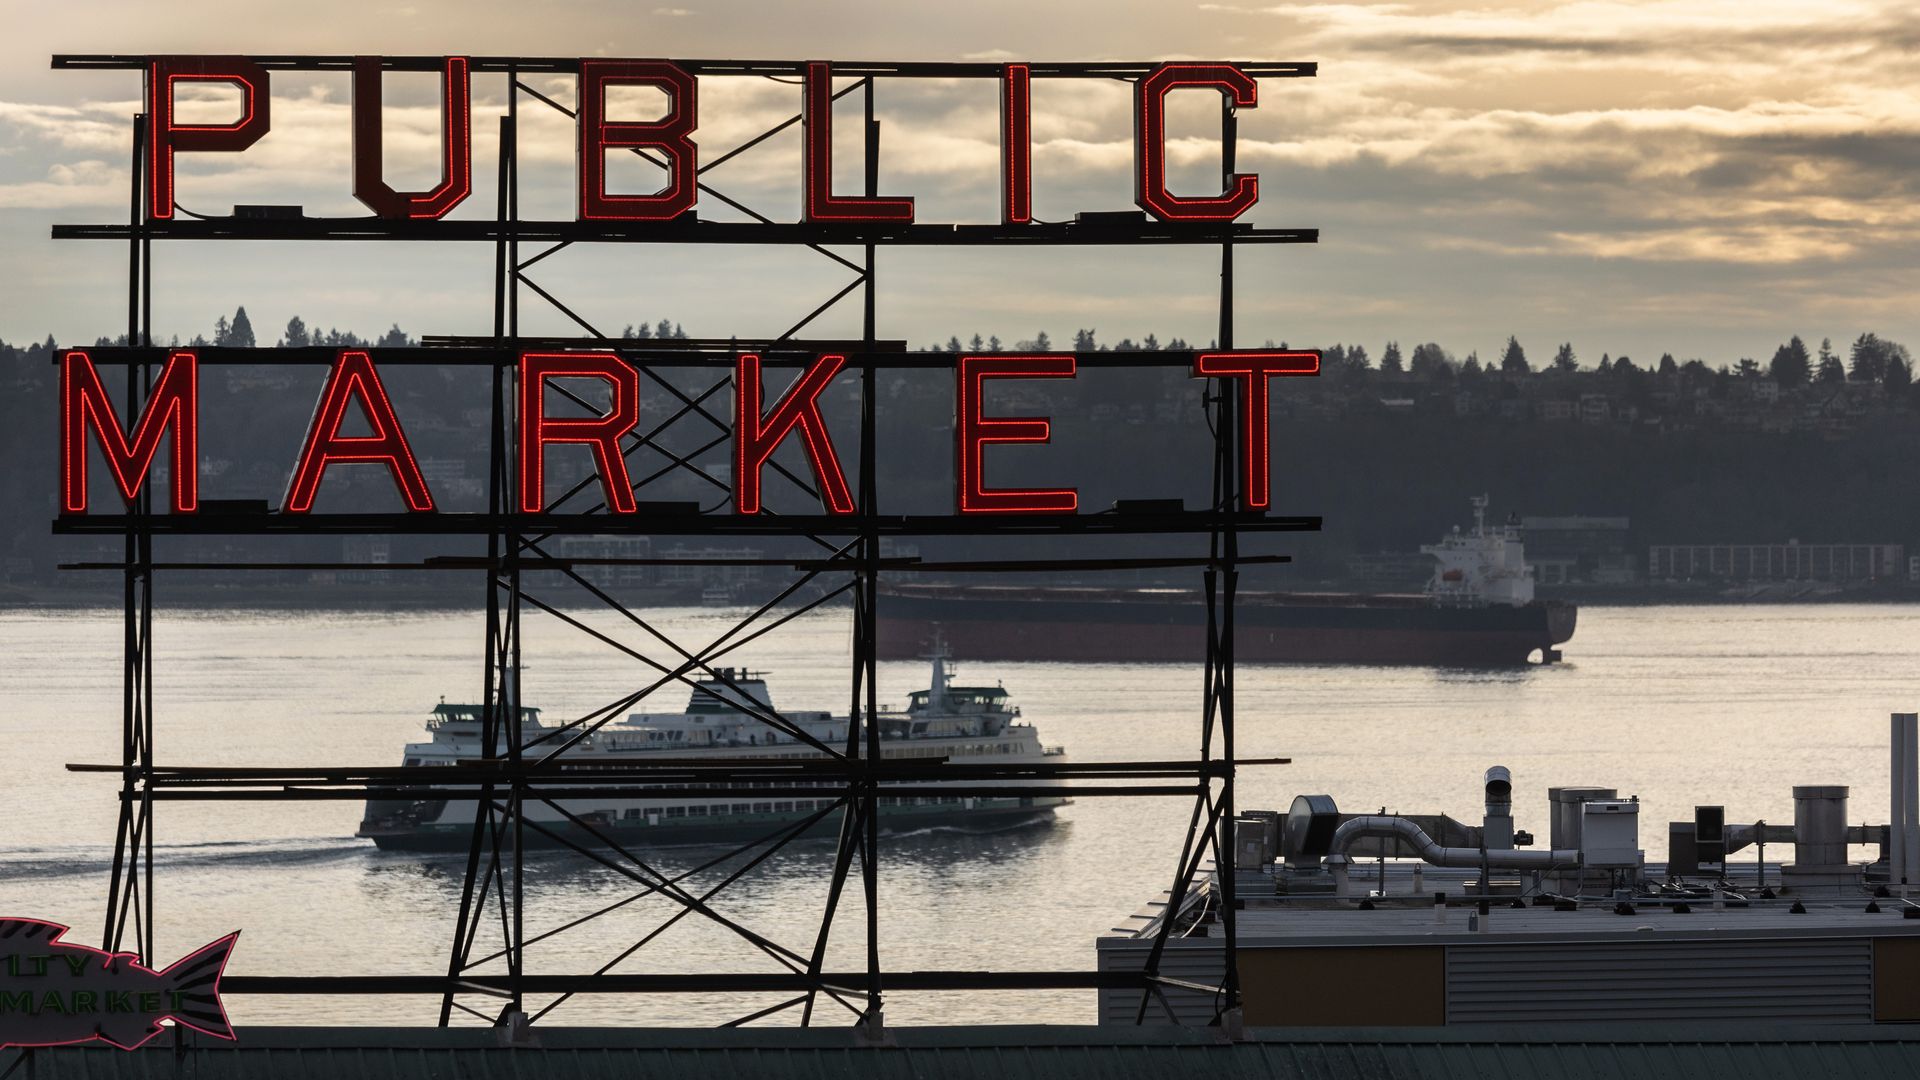 Sign for Pike Place Market in front of the Puget Sound